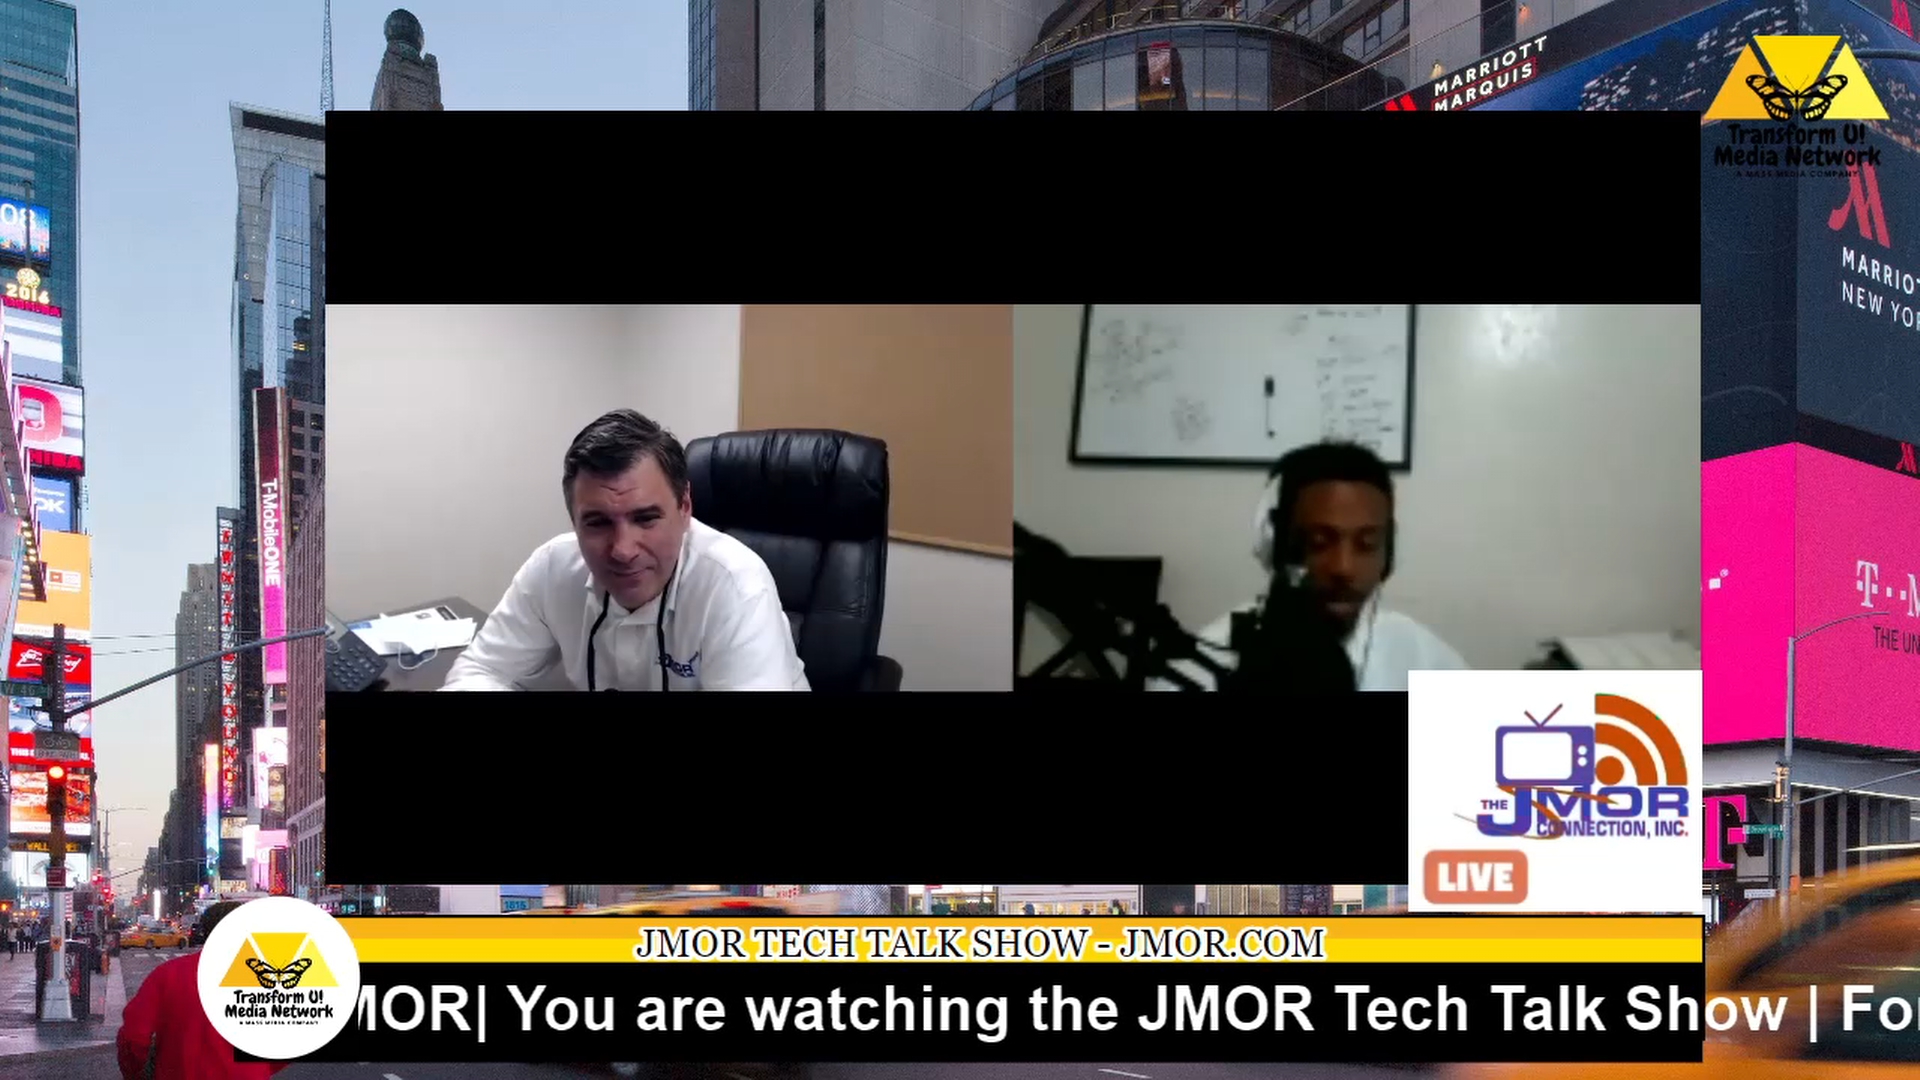 JMOR Tech Talk Show Aug 20, 2021:  Video Game Company is Alleged with Frat Boy Work Culture Facing a Sexual Harassment Lawsuit